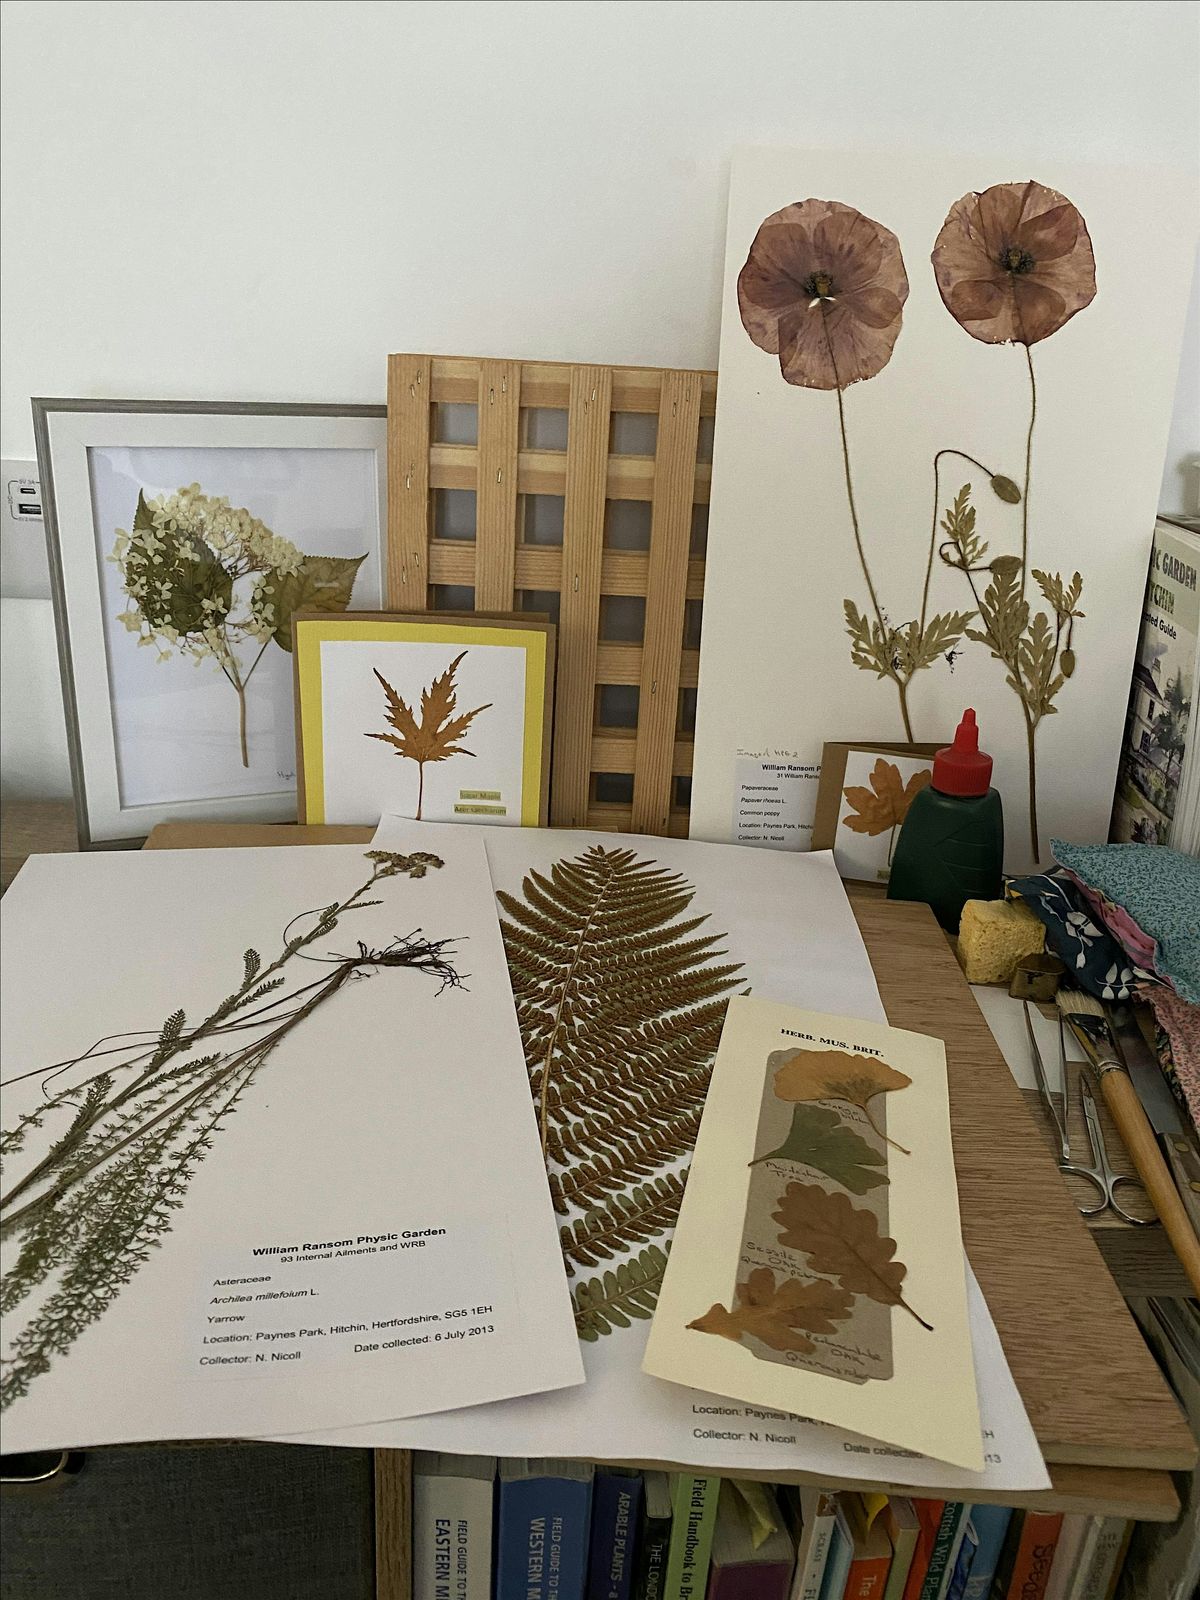 Press for Time (Plant mounting workshop)